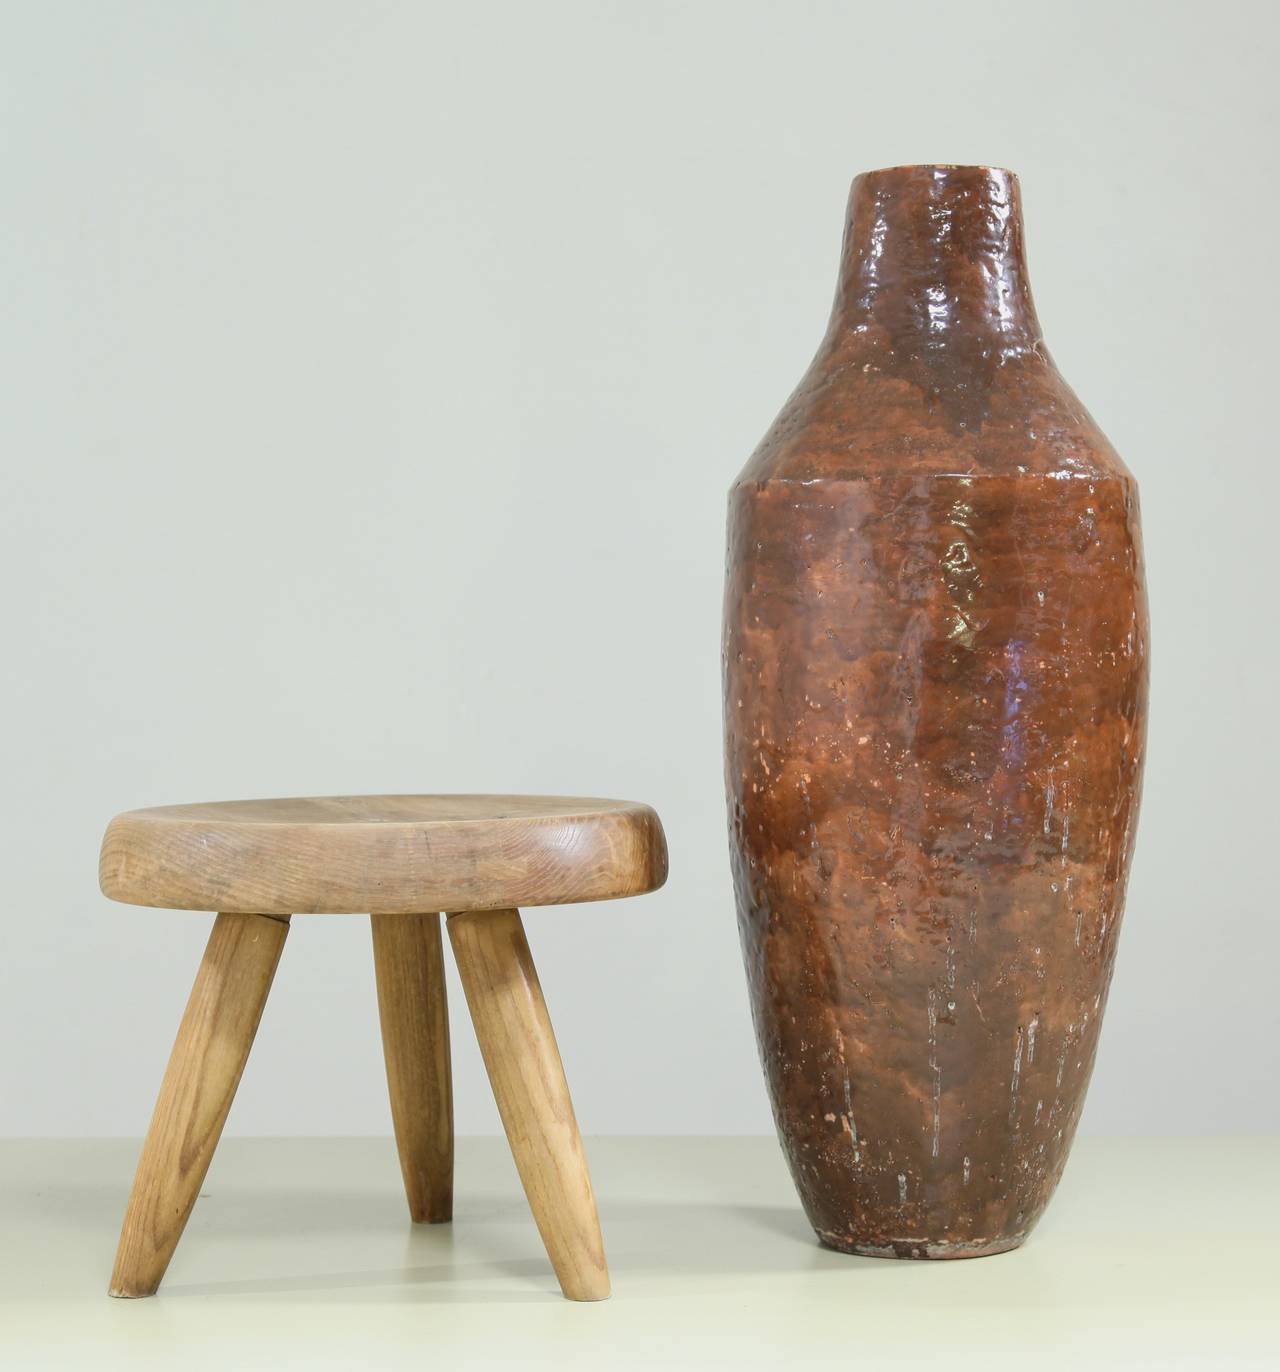 A large glazed brown ceramic vase from France in an excellent condition. 
Listed price is including insured shipment.